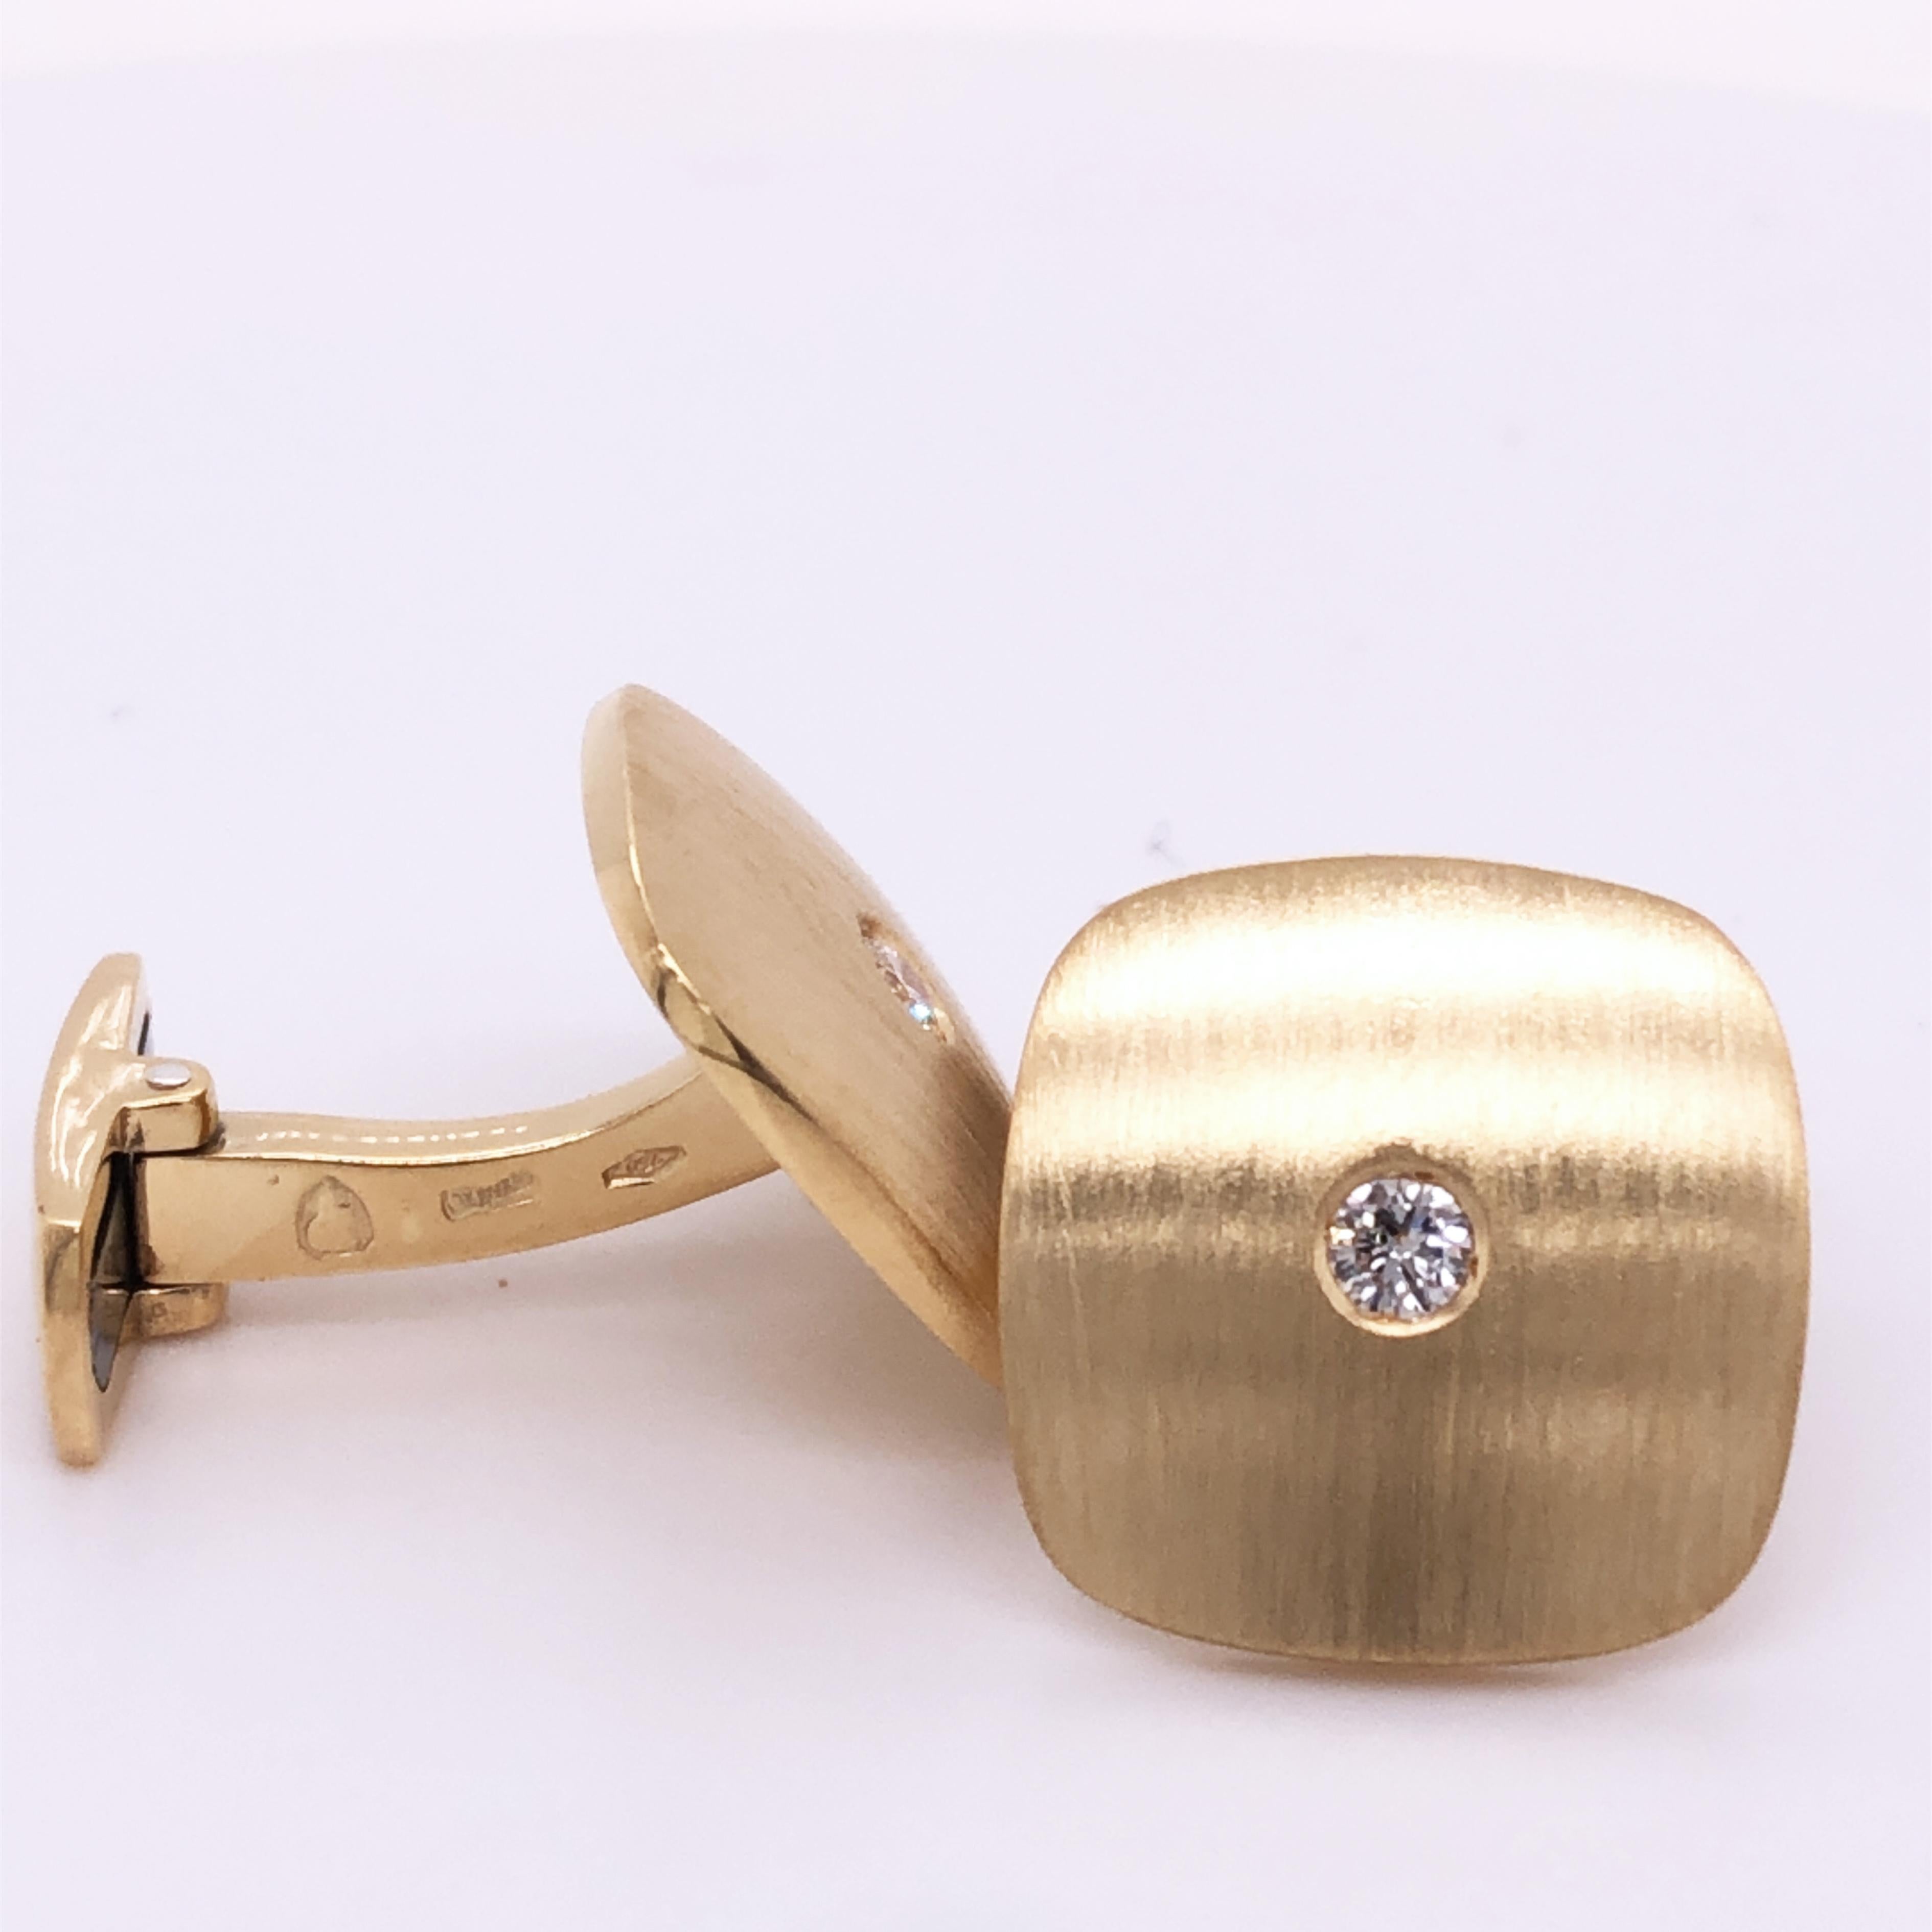 Unique, absolutely Chic yet Timeless 0.19 Carat White Diamond in an 18K Hand Brushed Yellow Gold Squared Shaped Setting Cufflinks, T-Bar back.
In our fitted Tobacco Leather Case and Pouch.